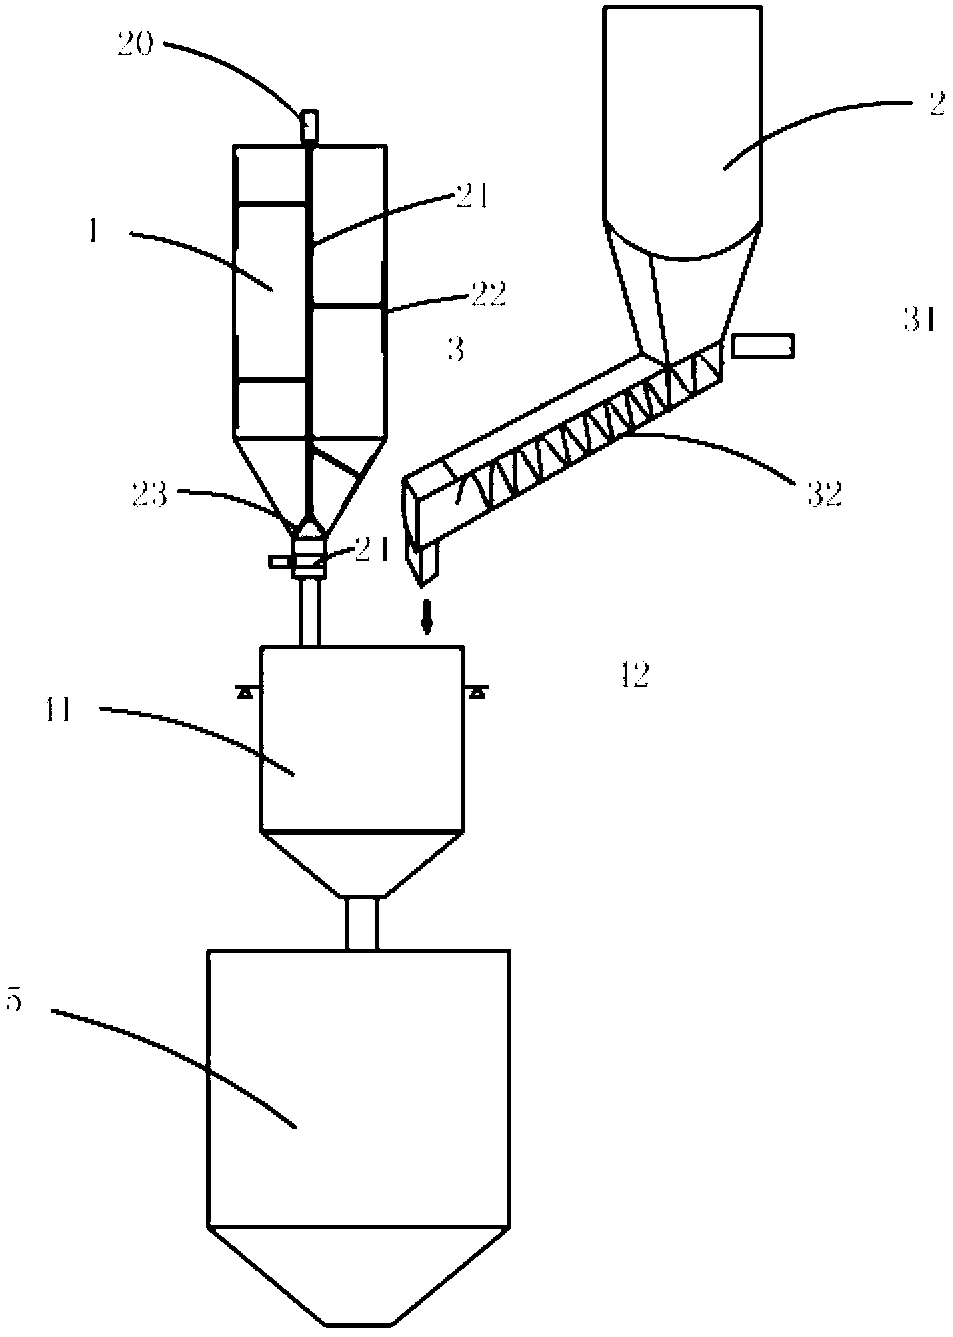 Secondary dosing and mixing system applied to processing rice noodles